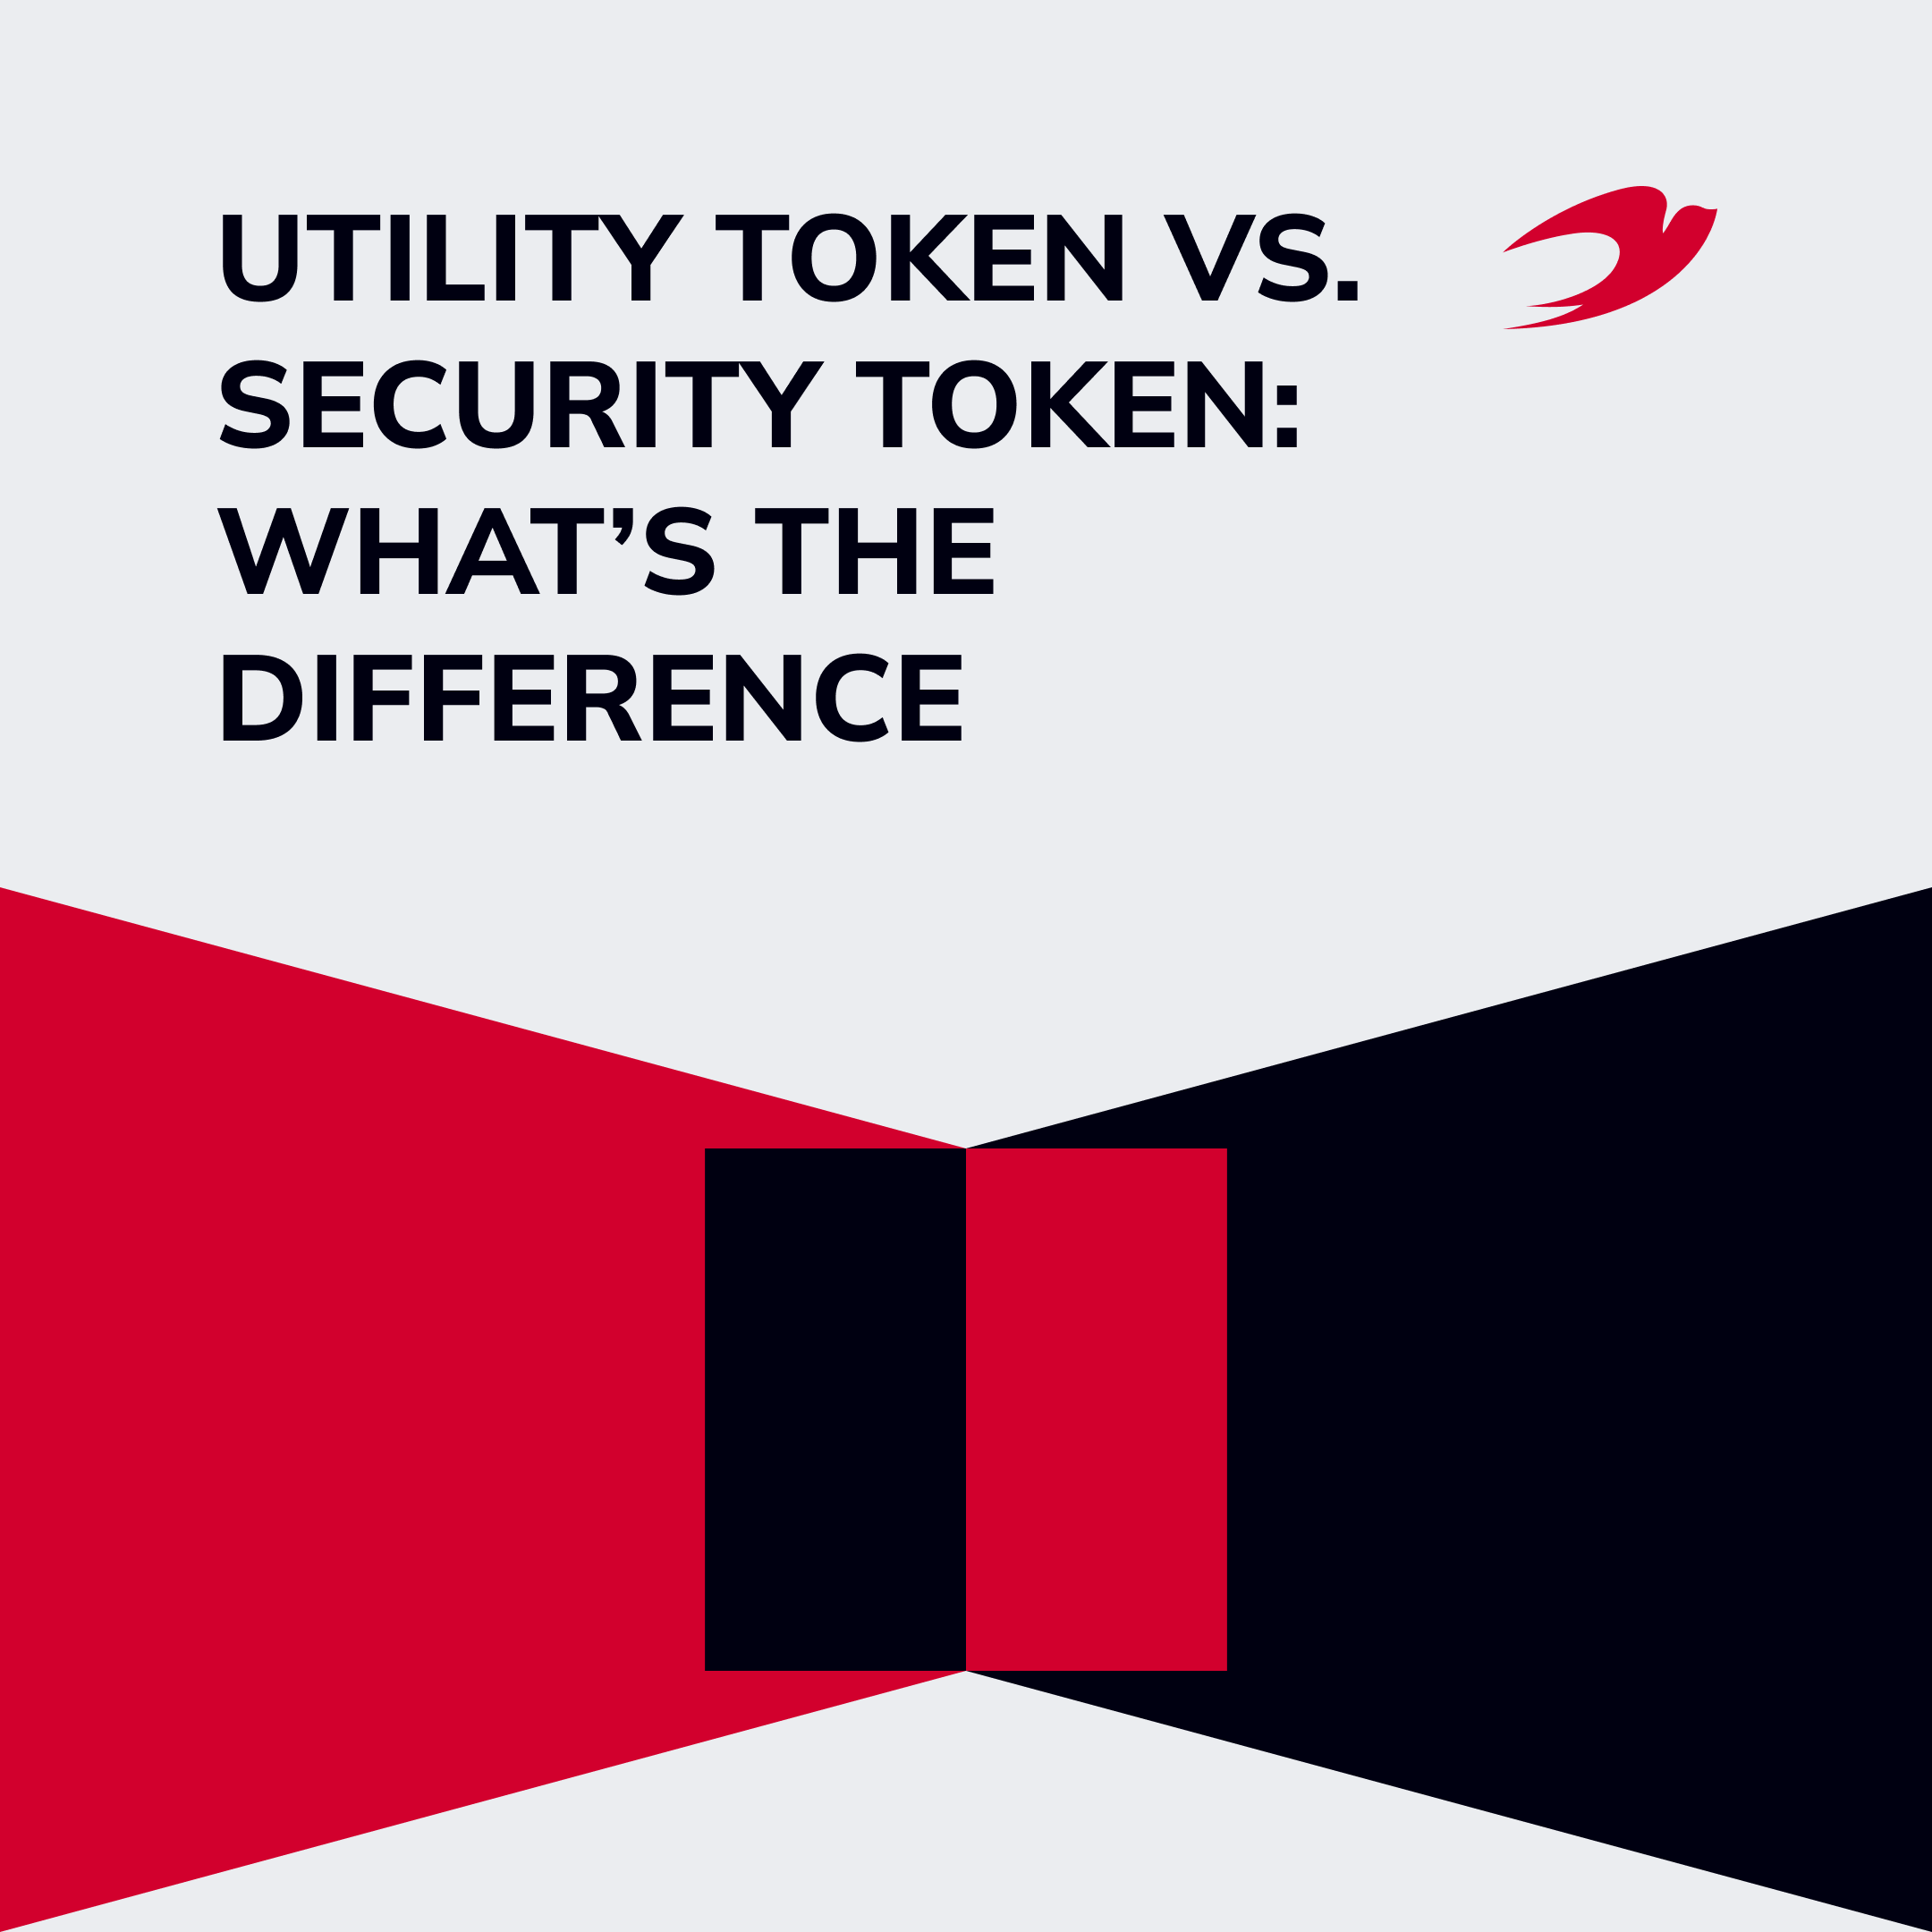 "Security Tokens Vs Utility Tokens: Key Differences"